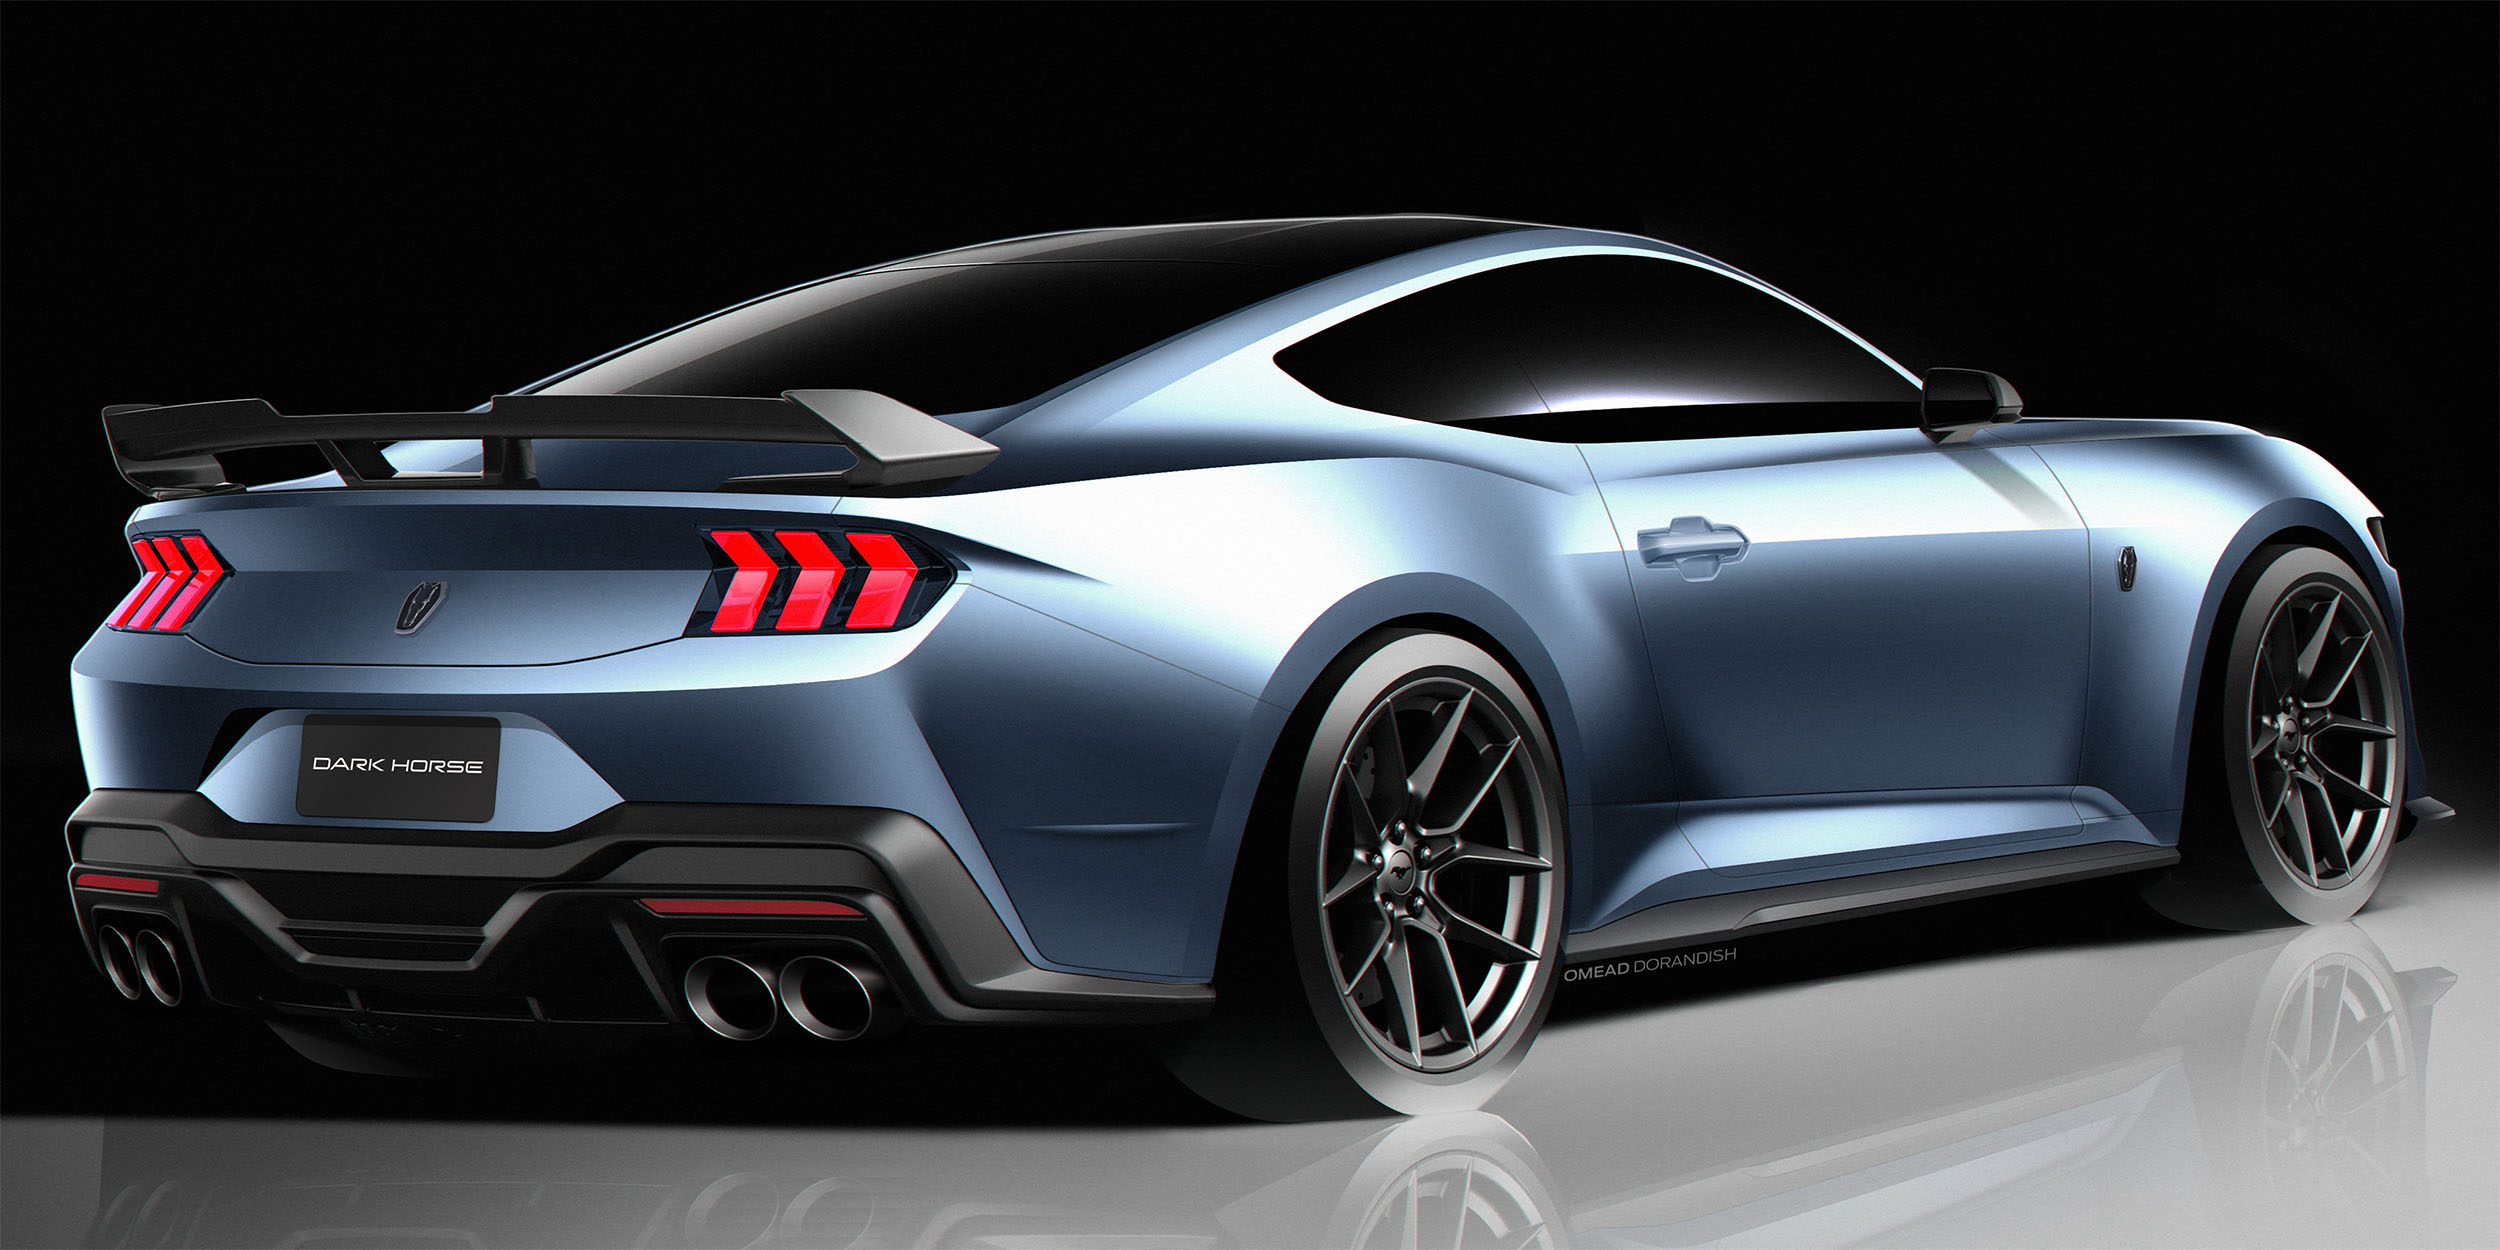 S650 Mustang Dark Horse Mustang in different colors sketches posted by Ford Performance dark horse mustang s650 rear